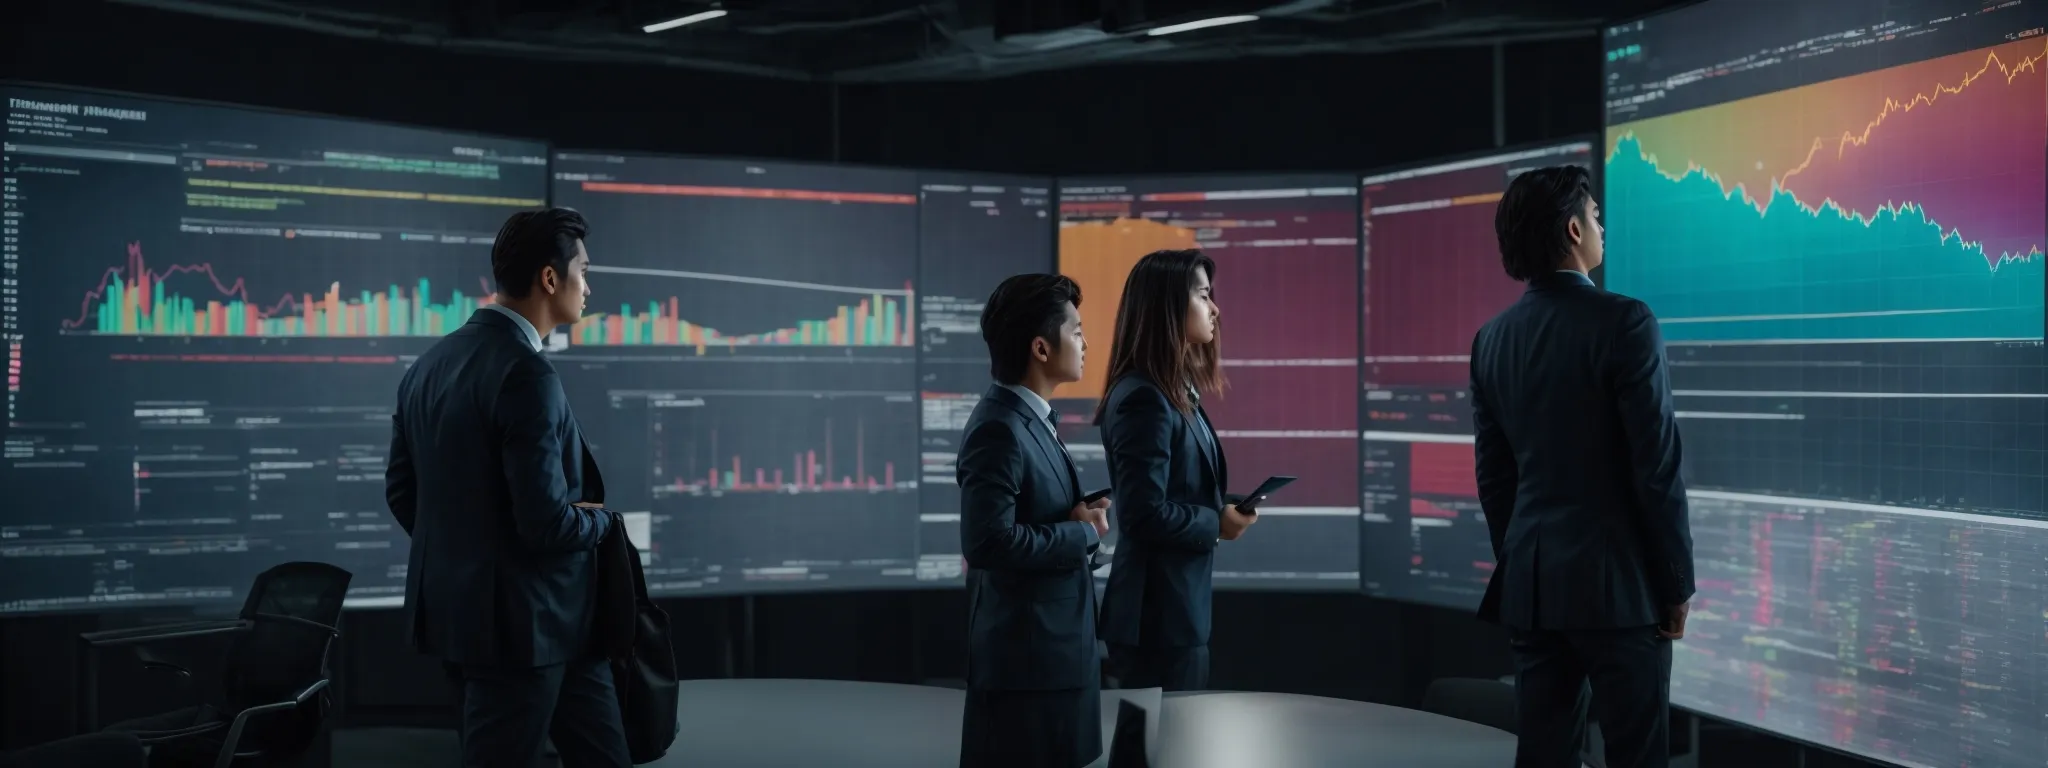 a group of focused professionals gathers around a large digital screen displaying colorful charts and graphs, reflecting the analysis of time spent on various projects.